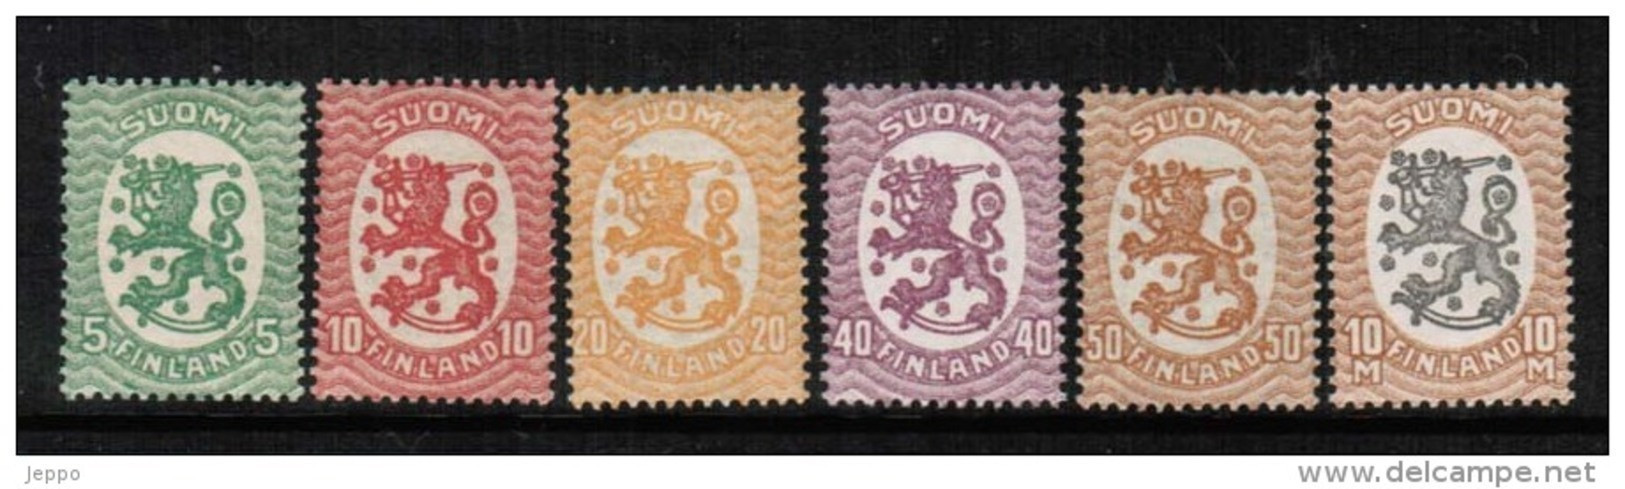 1917 Finland Republic 6 Values Between Michel 68 - 93 MNH **. - Unused Stamps